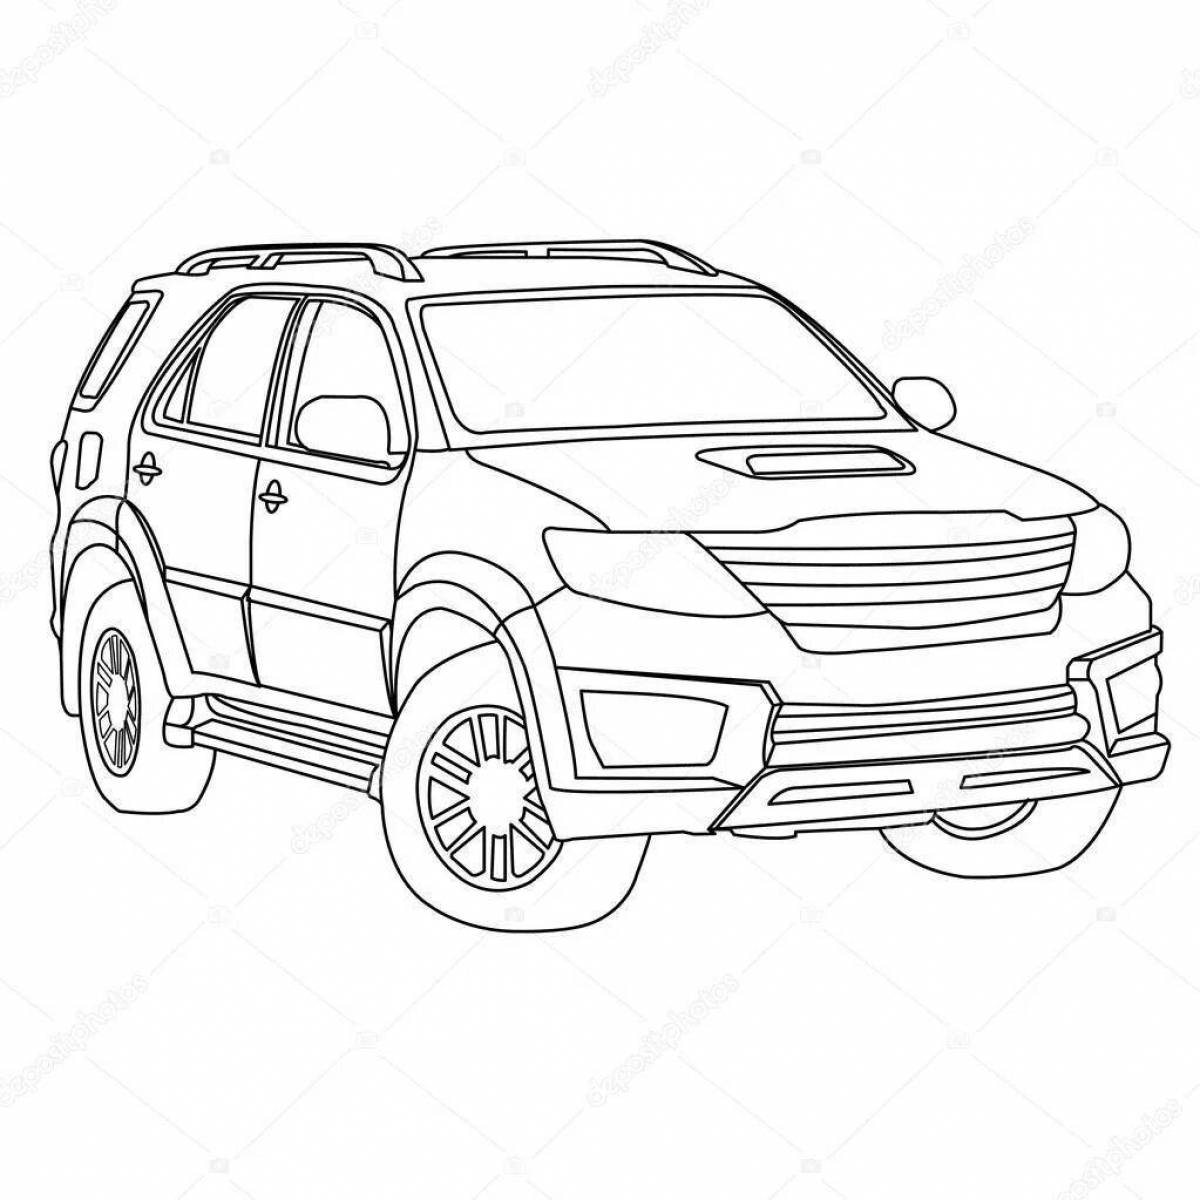 Sample livery for lexus lx 570